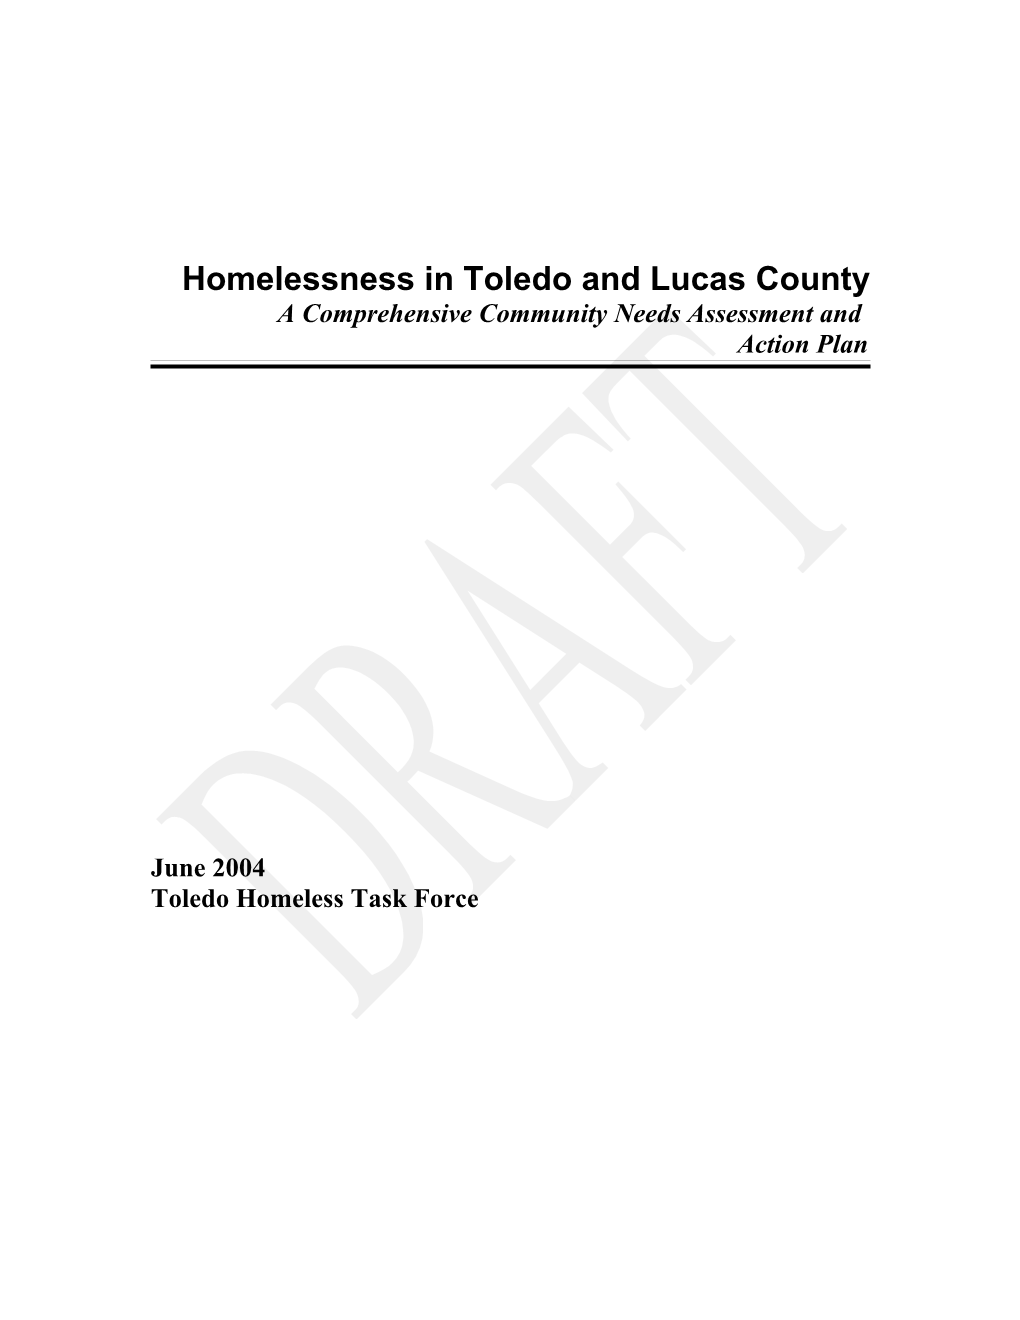 Homelessness in Toledo and Lucas County